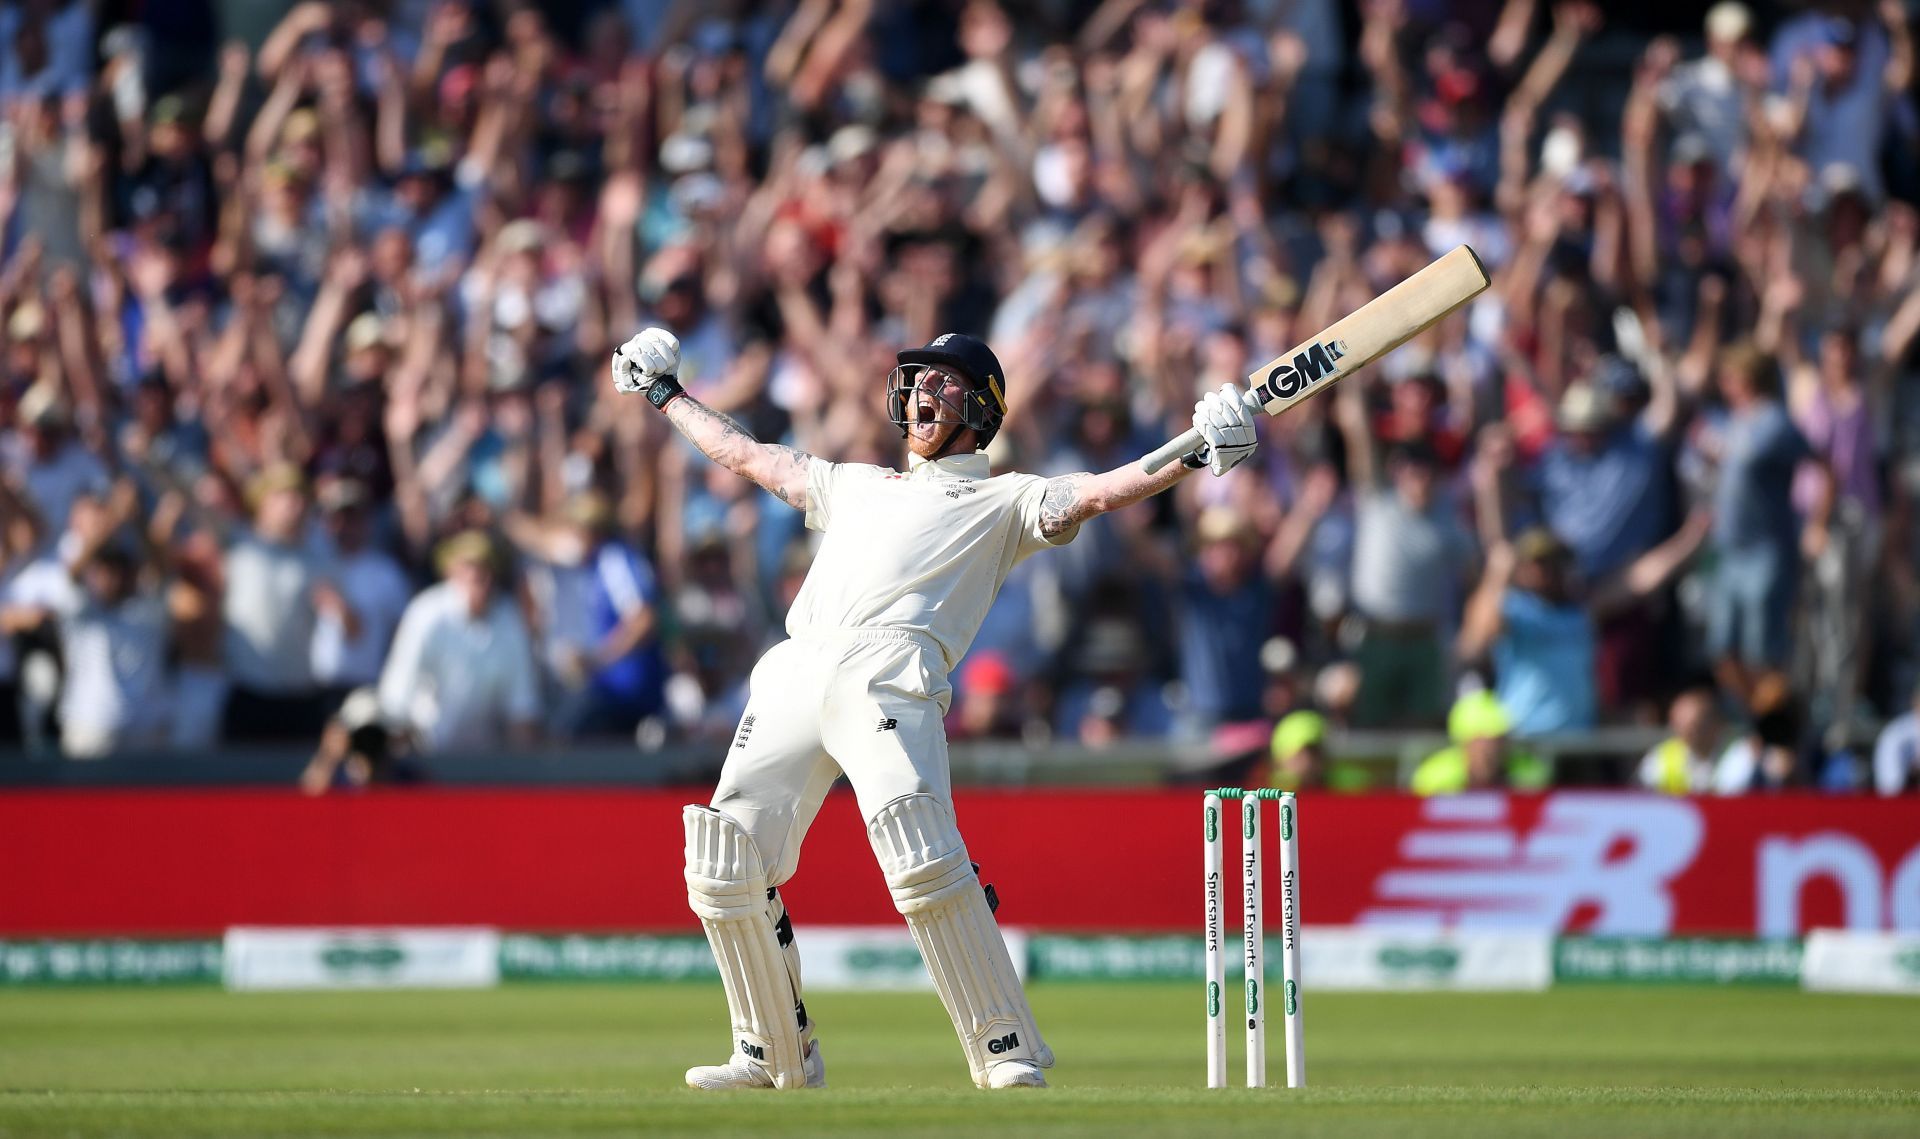 The iconic image of Ben Stokes&rsquo; reaction after England&rsquo;s win in the 2019 Headingley Test. (Pic: Getty Images)